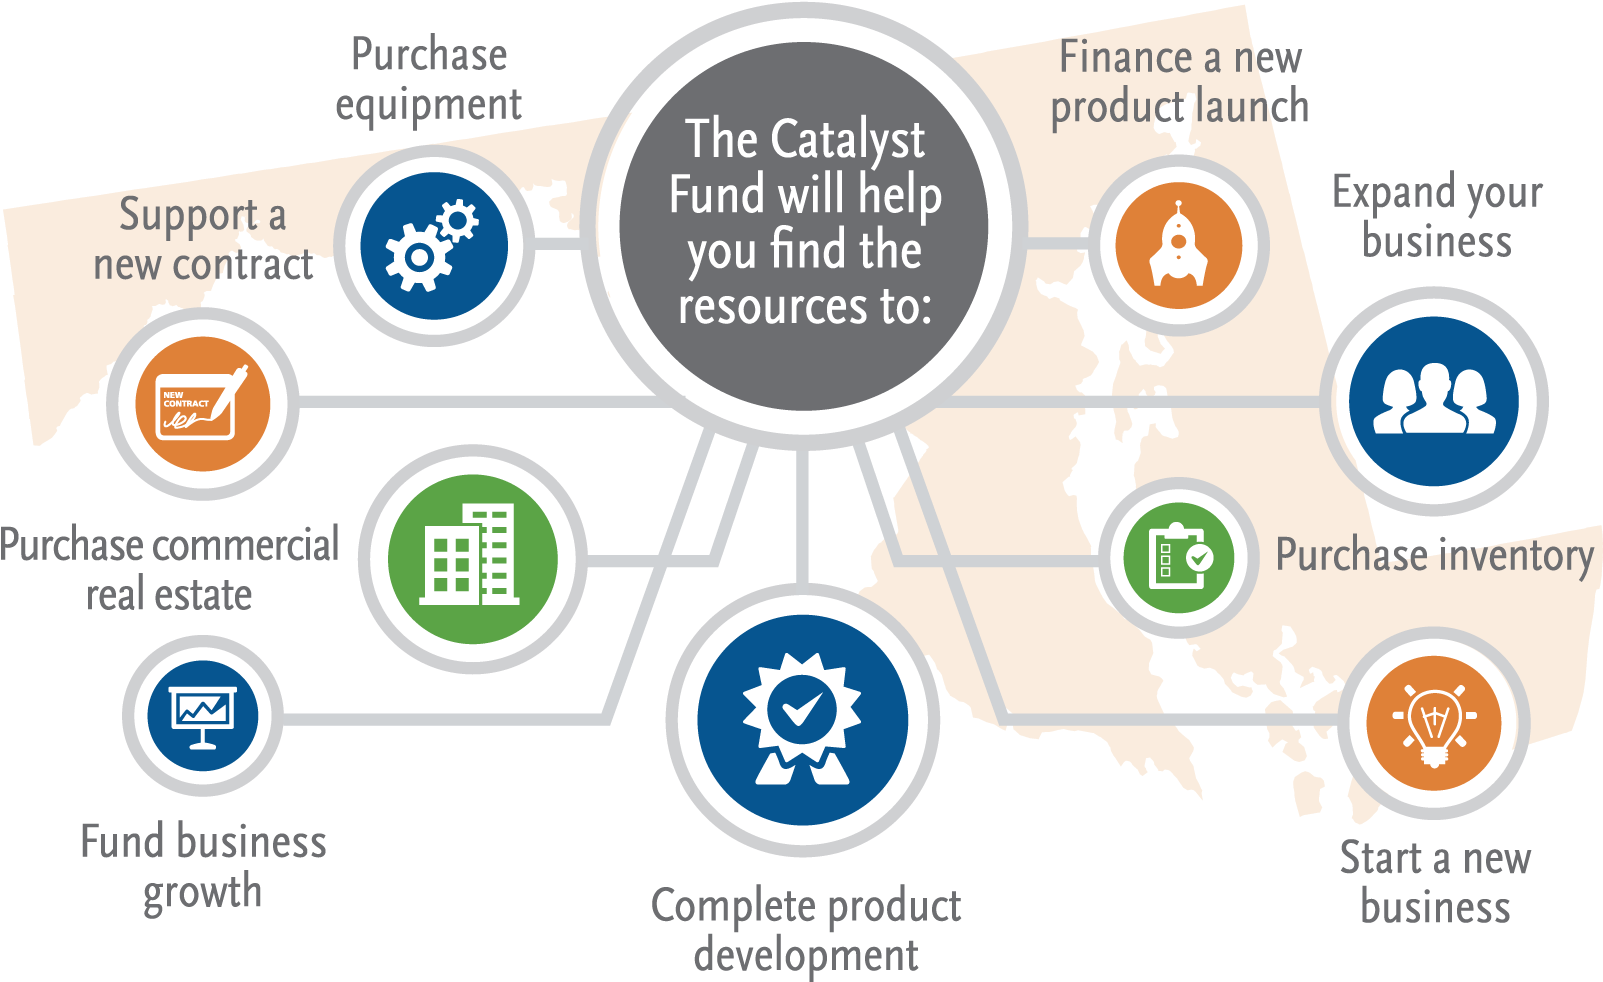 Catalyst Fund - Funds Business (1602x1001)